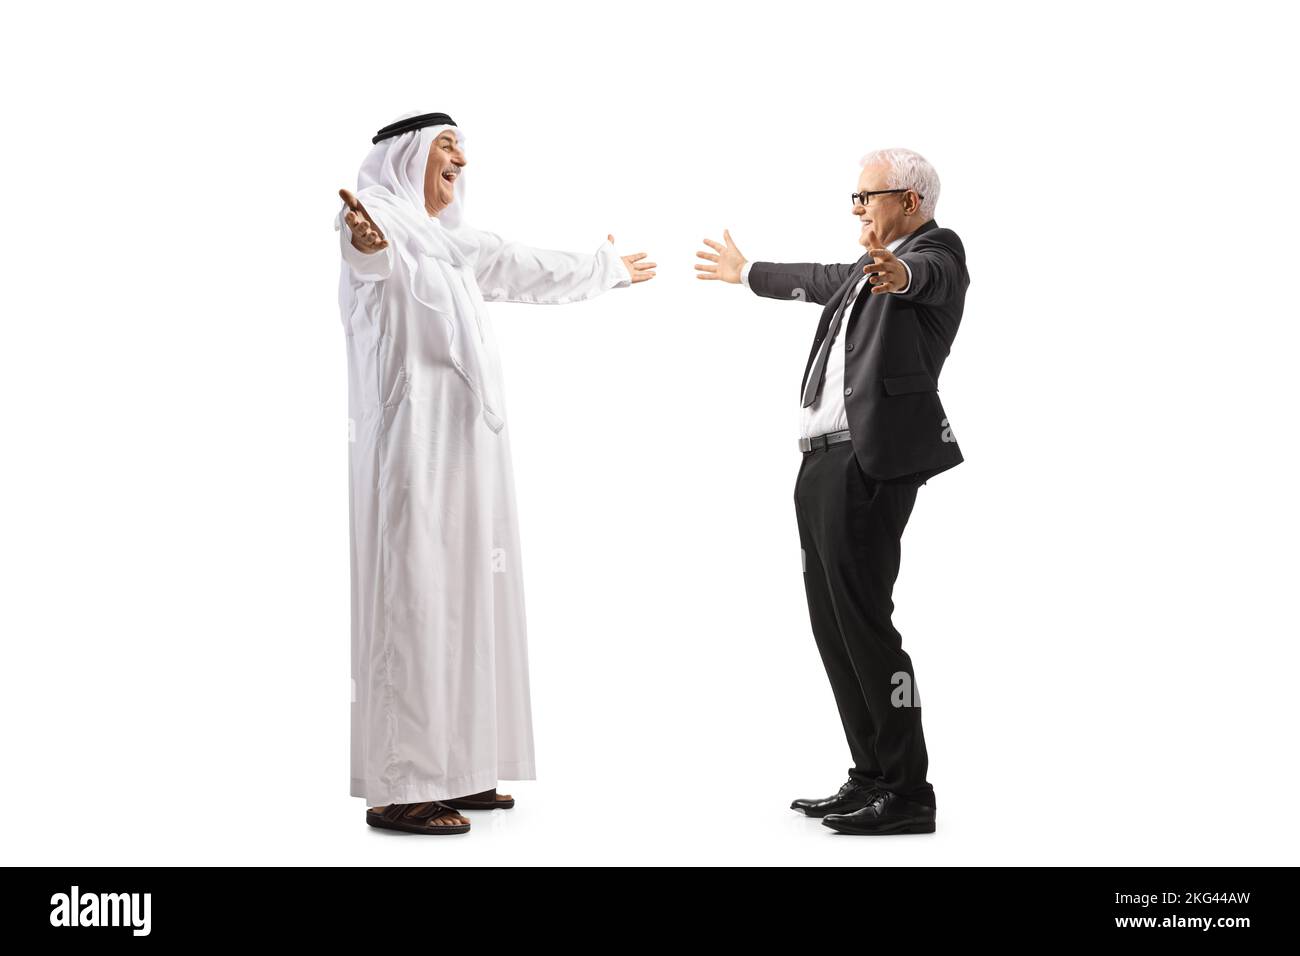 Full length profile shot of a mature arab man in a robe meeting a businessman friend isolated on white background Stock Photo